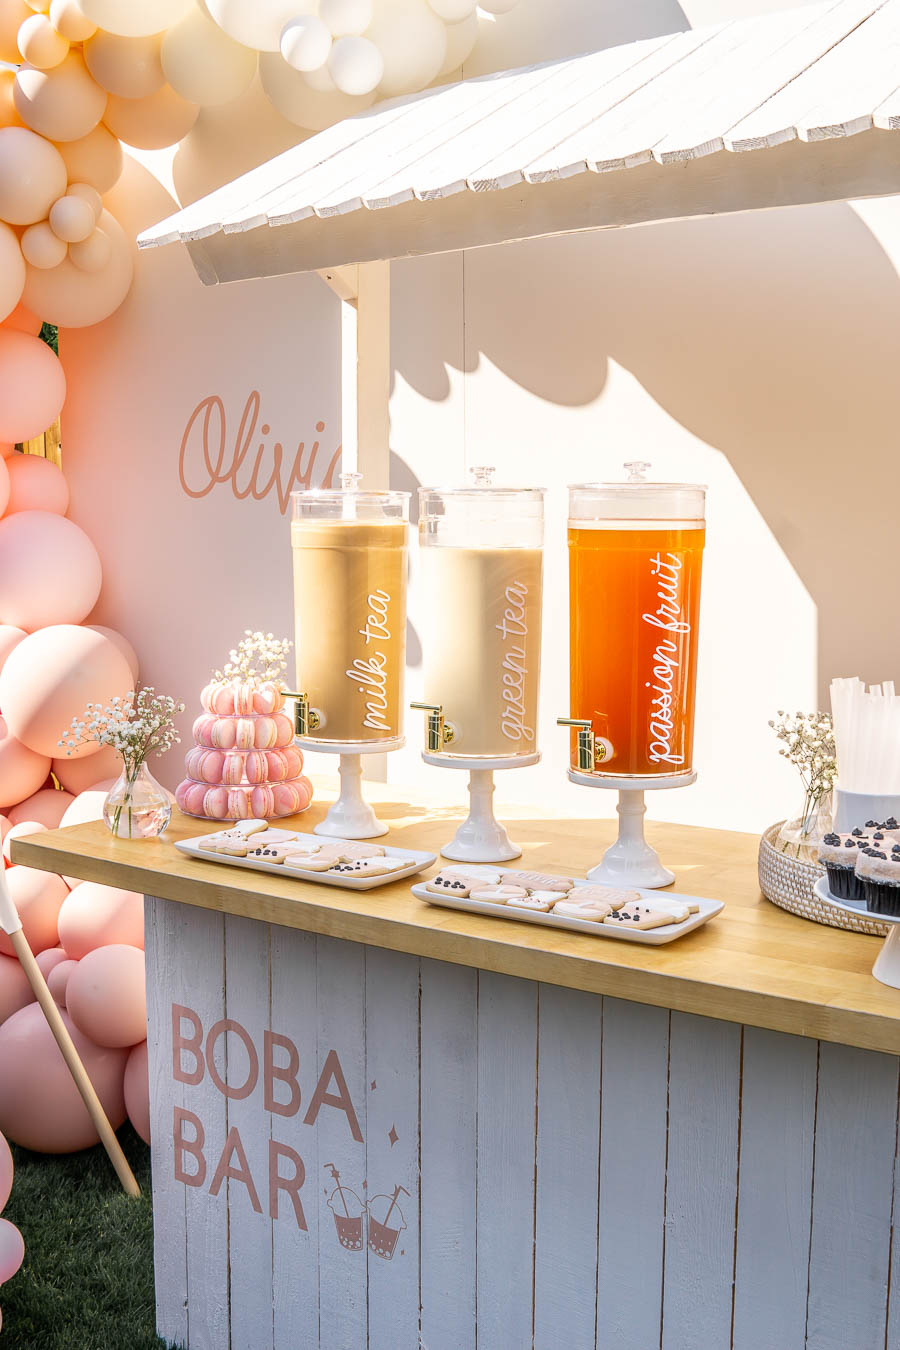 boba bar, boba drink dispensers, clear drink dispensers, boba party theme, boba drinks for birthday party, boba drink display, milk tea first birthday party, homemade milk teas for party, boba bar display